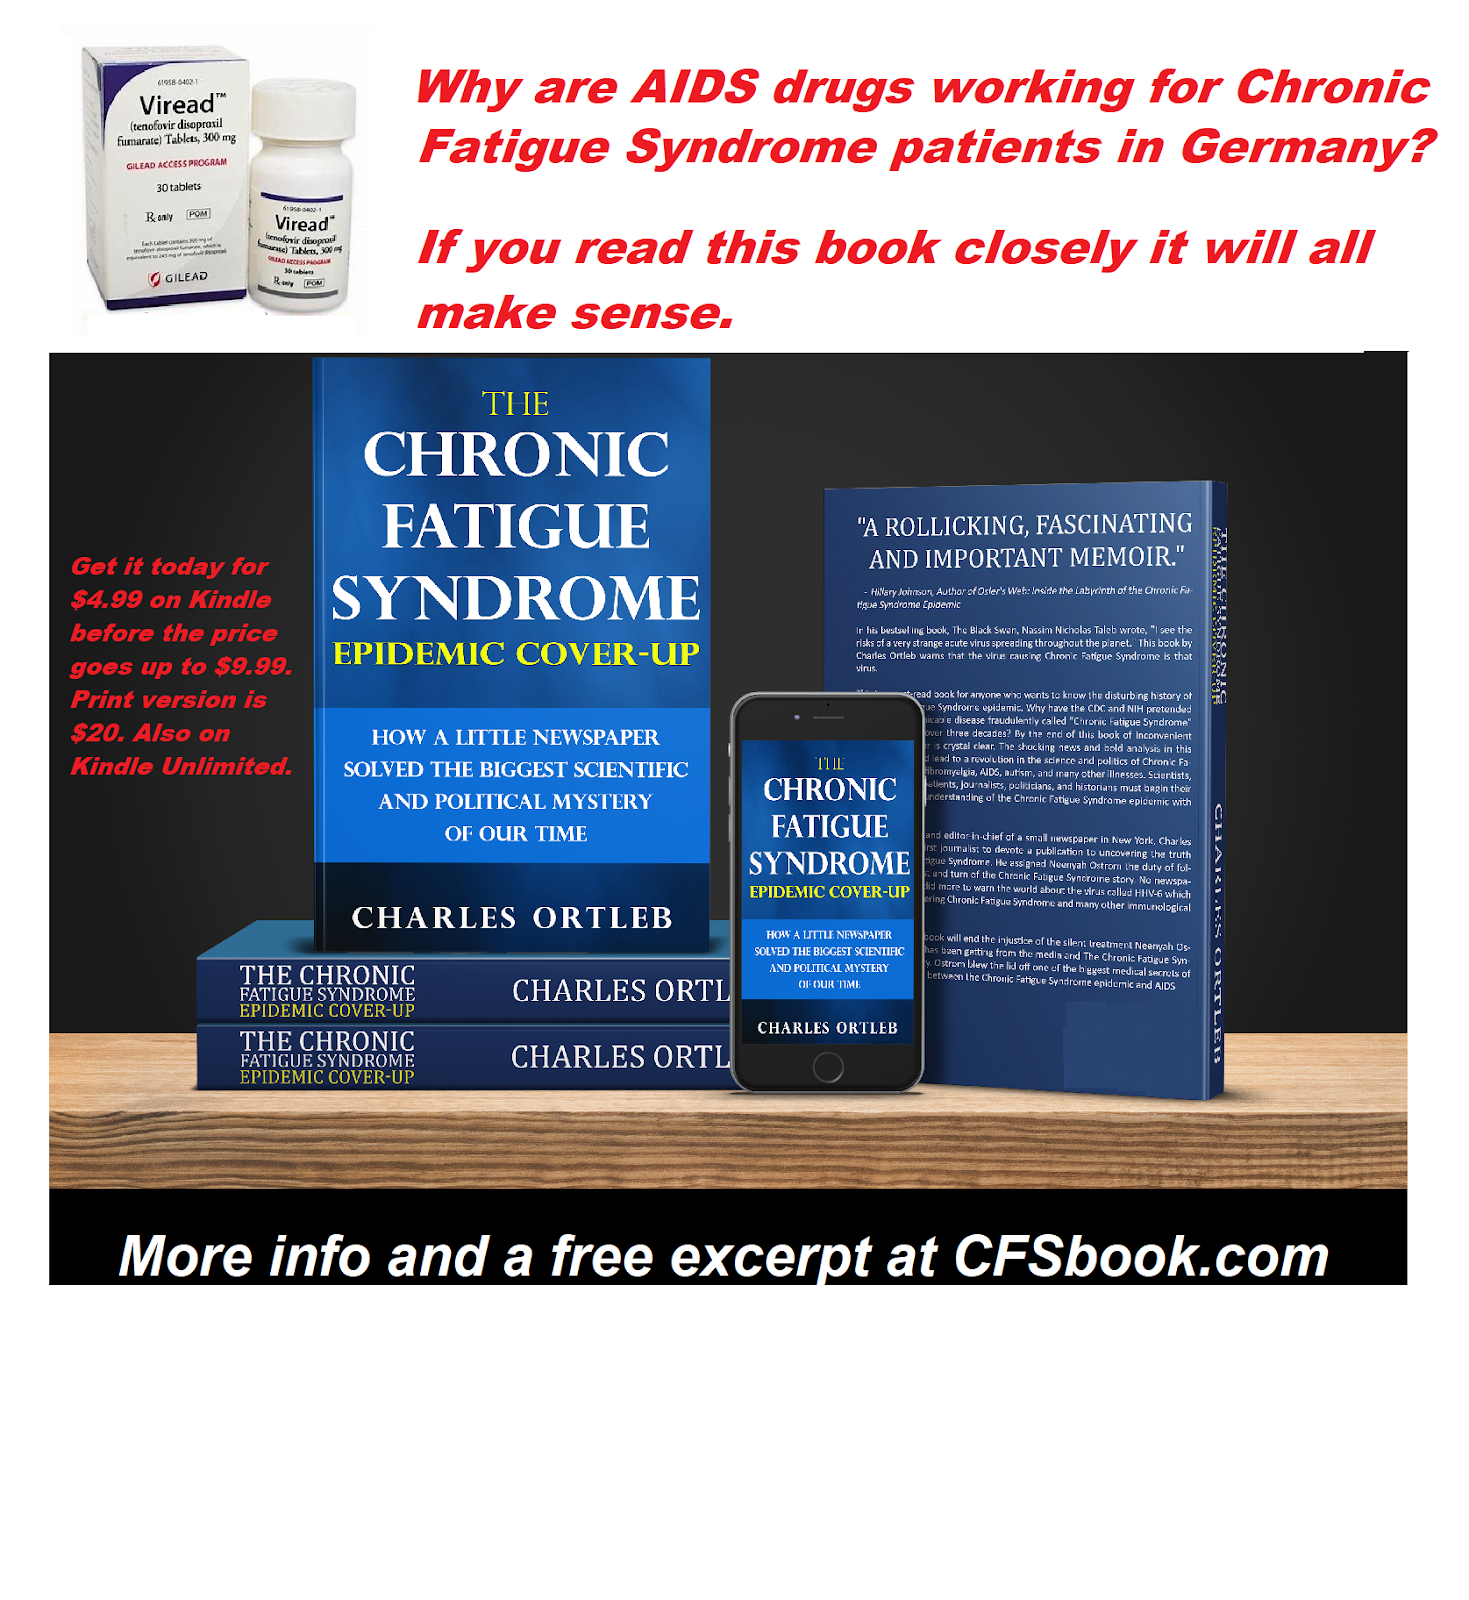 AIDS drugs help these Chronic Fatigue Syndrome patients. Does it help ...